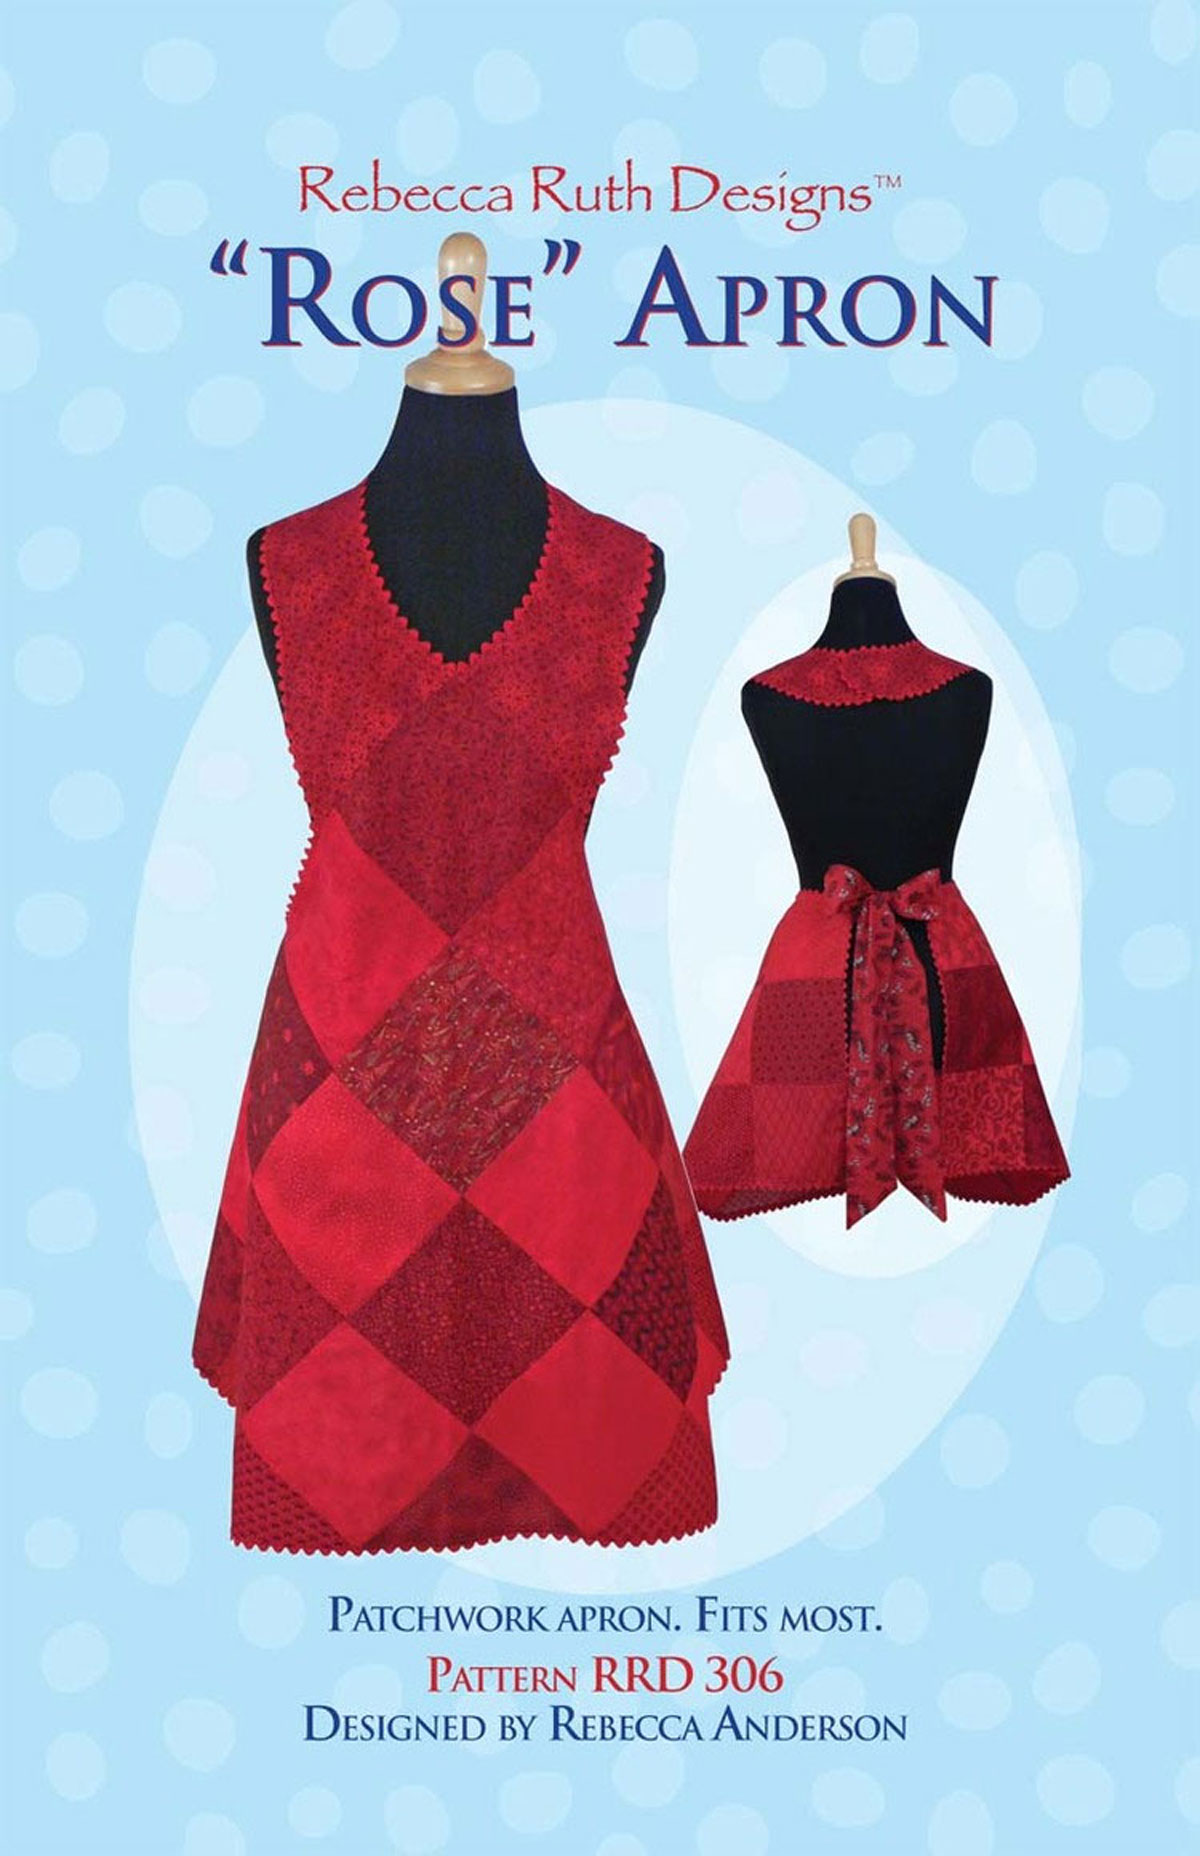 Rose-Apron-sewing-pattern-rebecca-ruth-designs-front